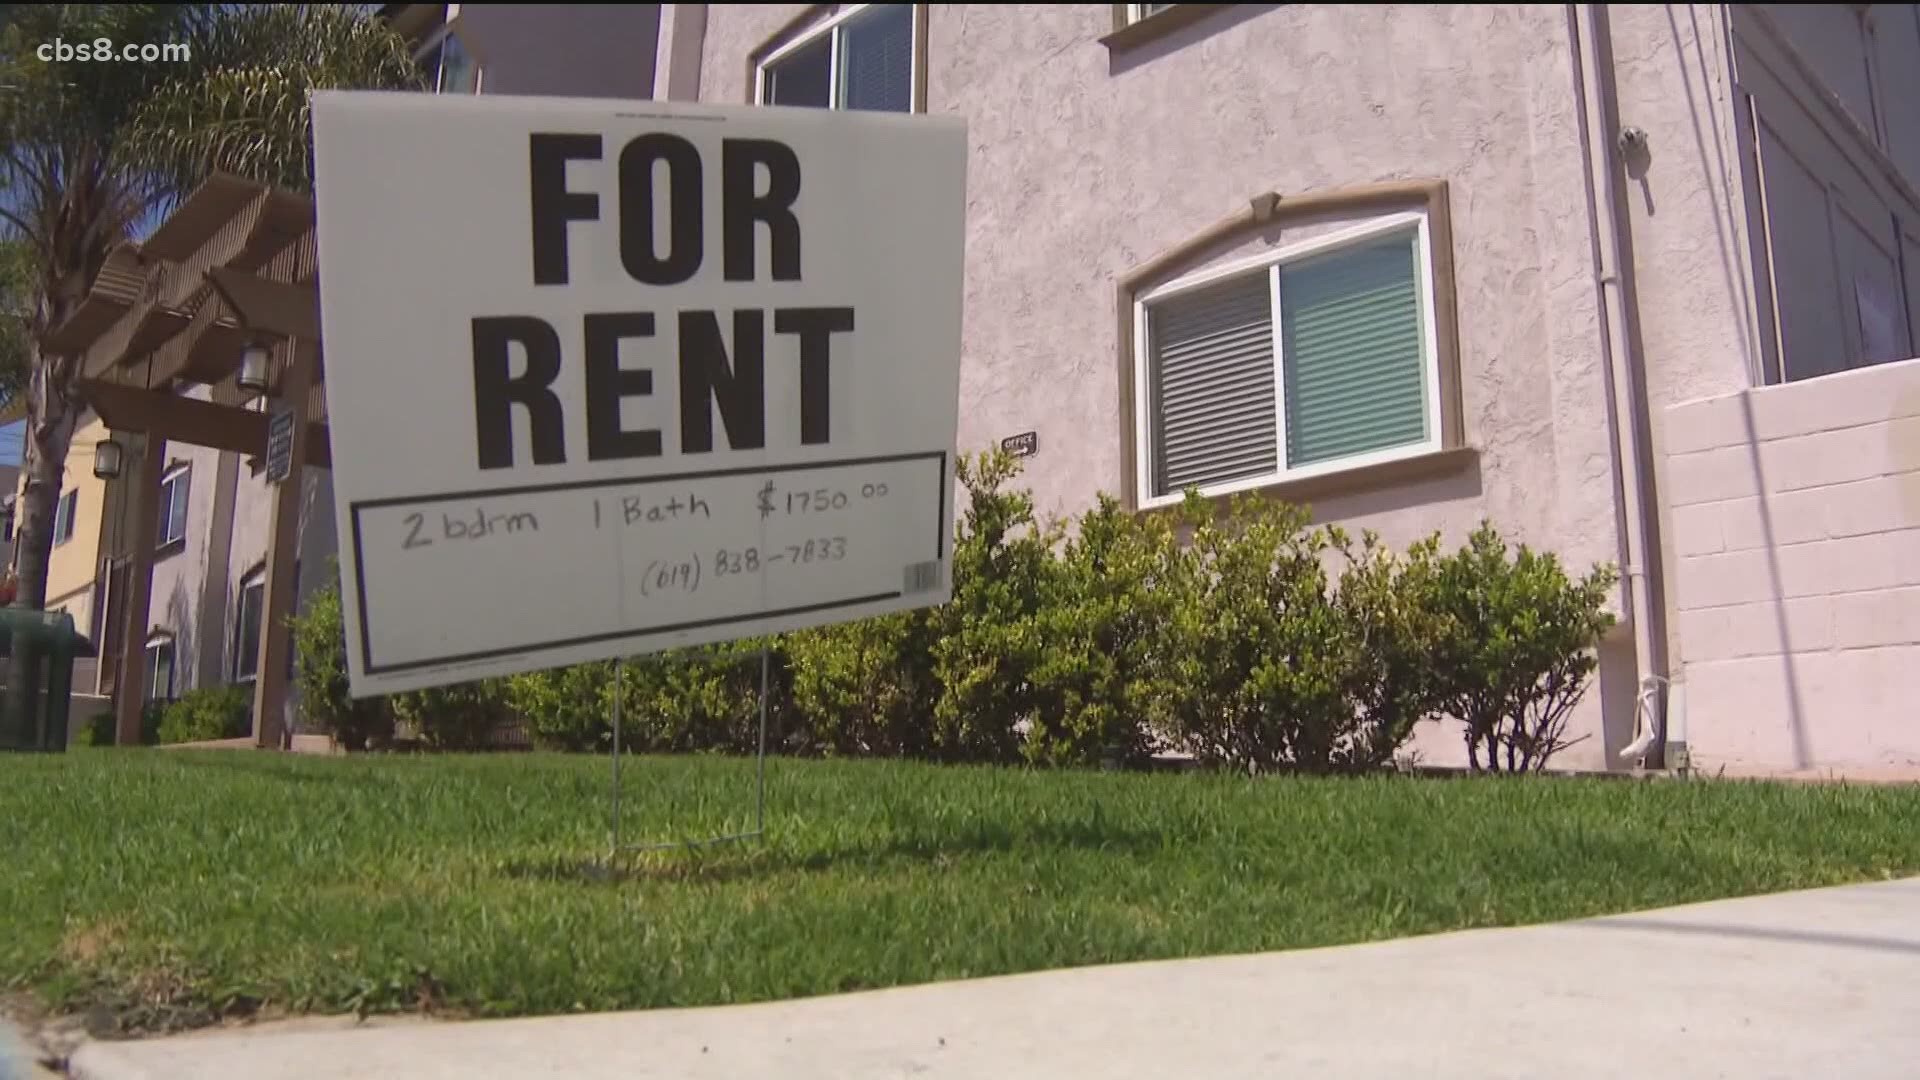 There is some help for landlords, but it's not that simple.